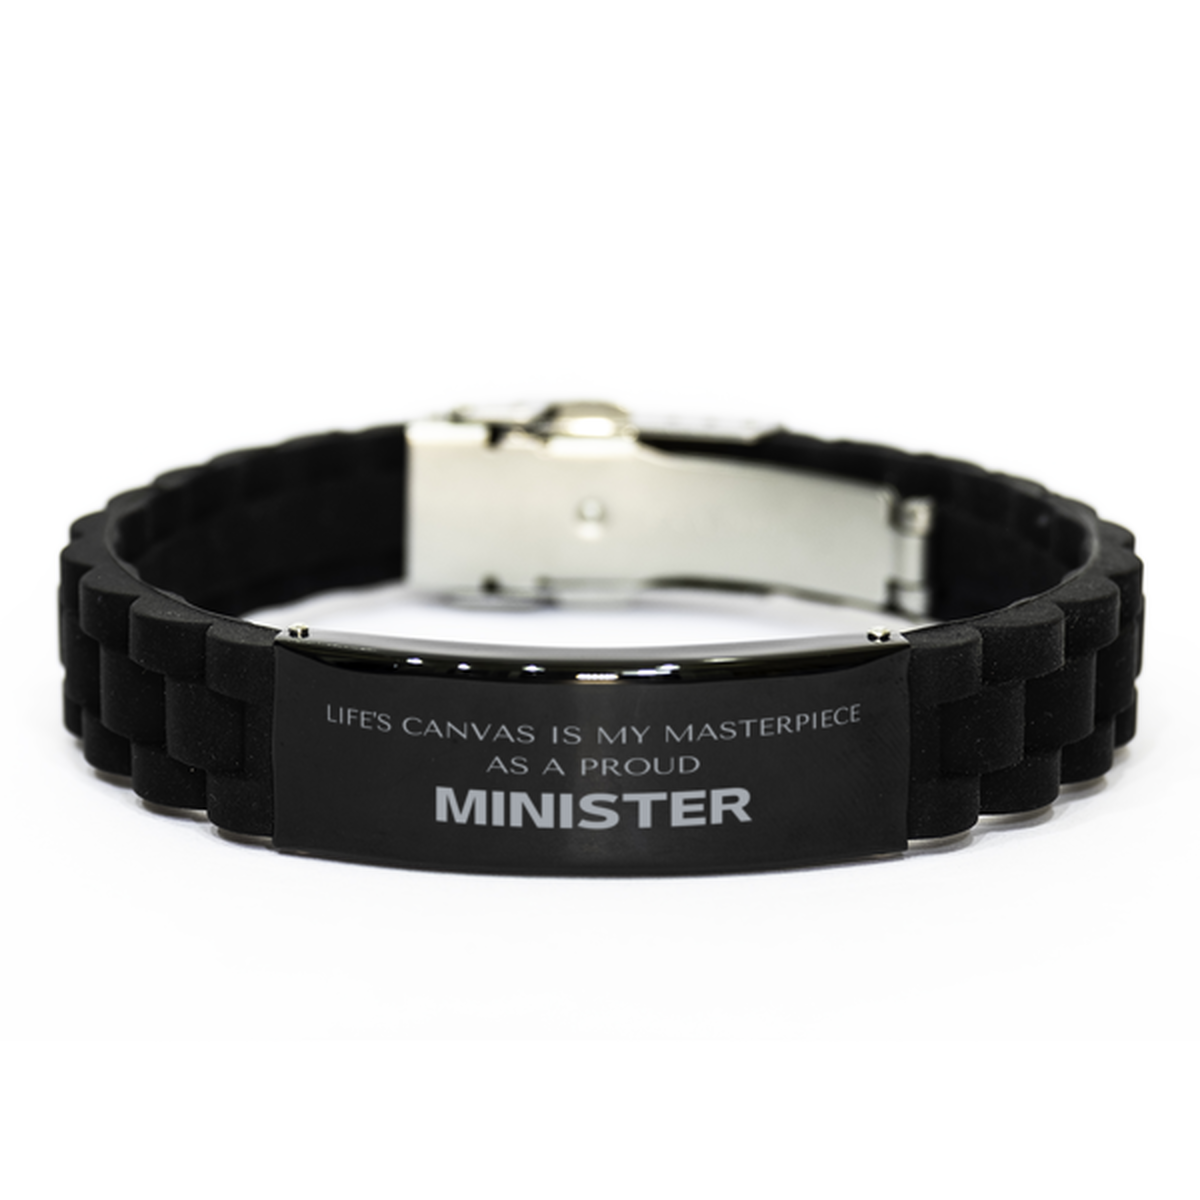 Proud Minister Gifts, Life's canvas is my masterpiece, Epic Birthday Christmas Unique Black Glidelock Clasp Bracelet For Minister, Coworkers, Men, Women, Friends